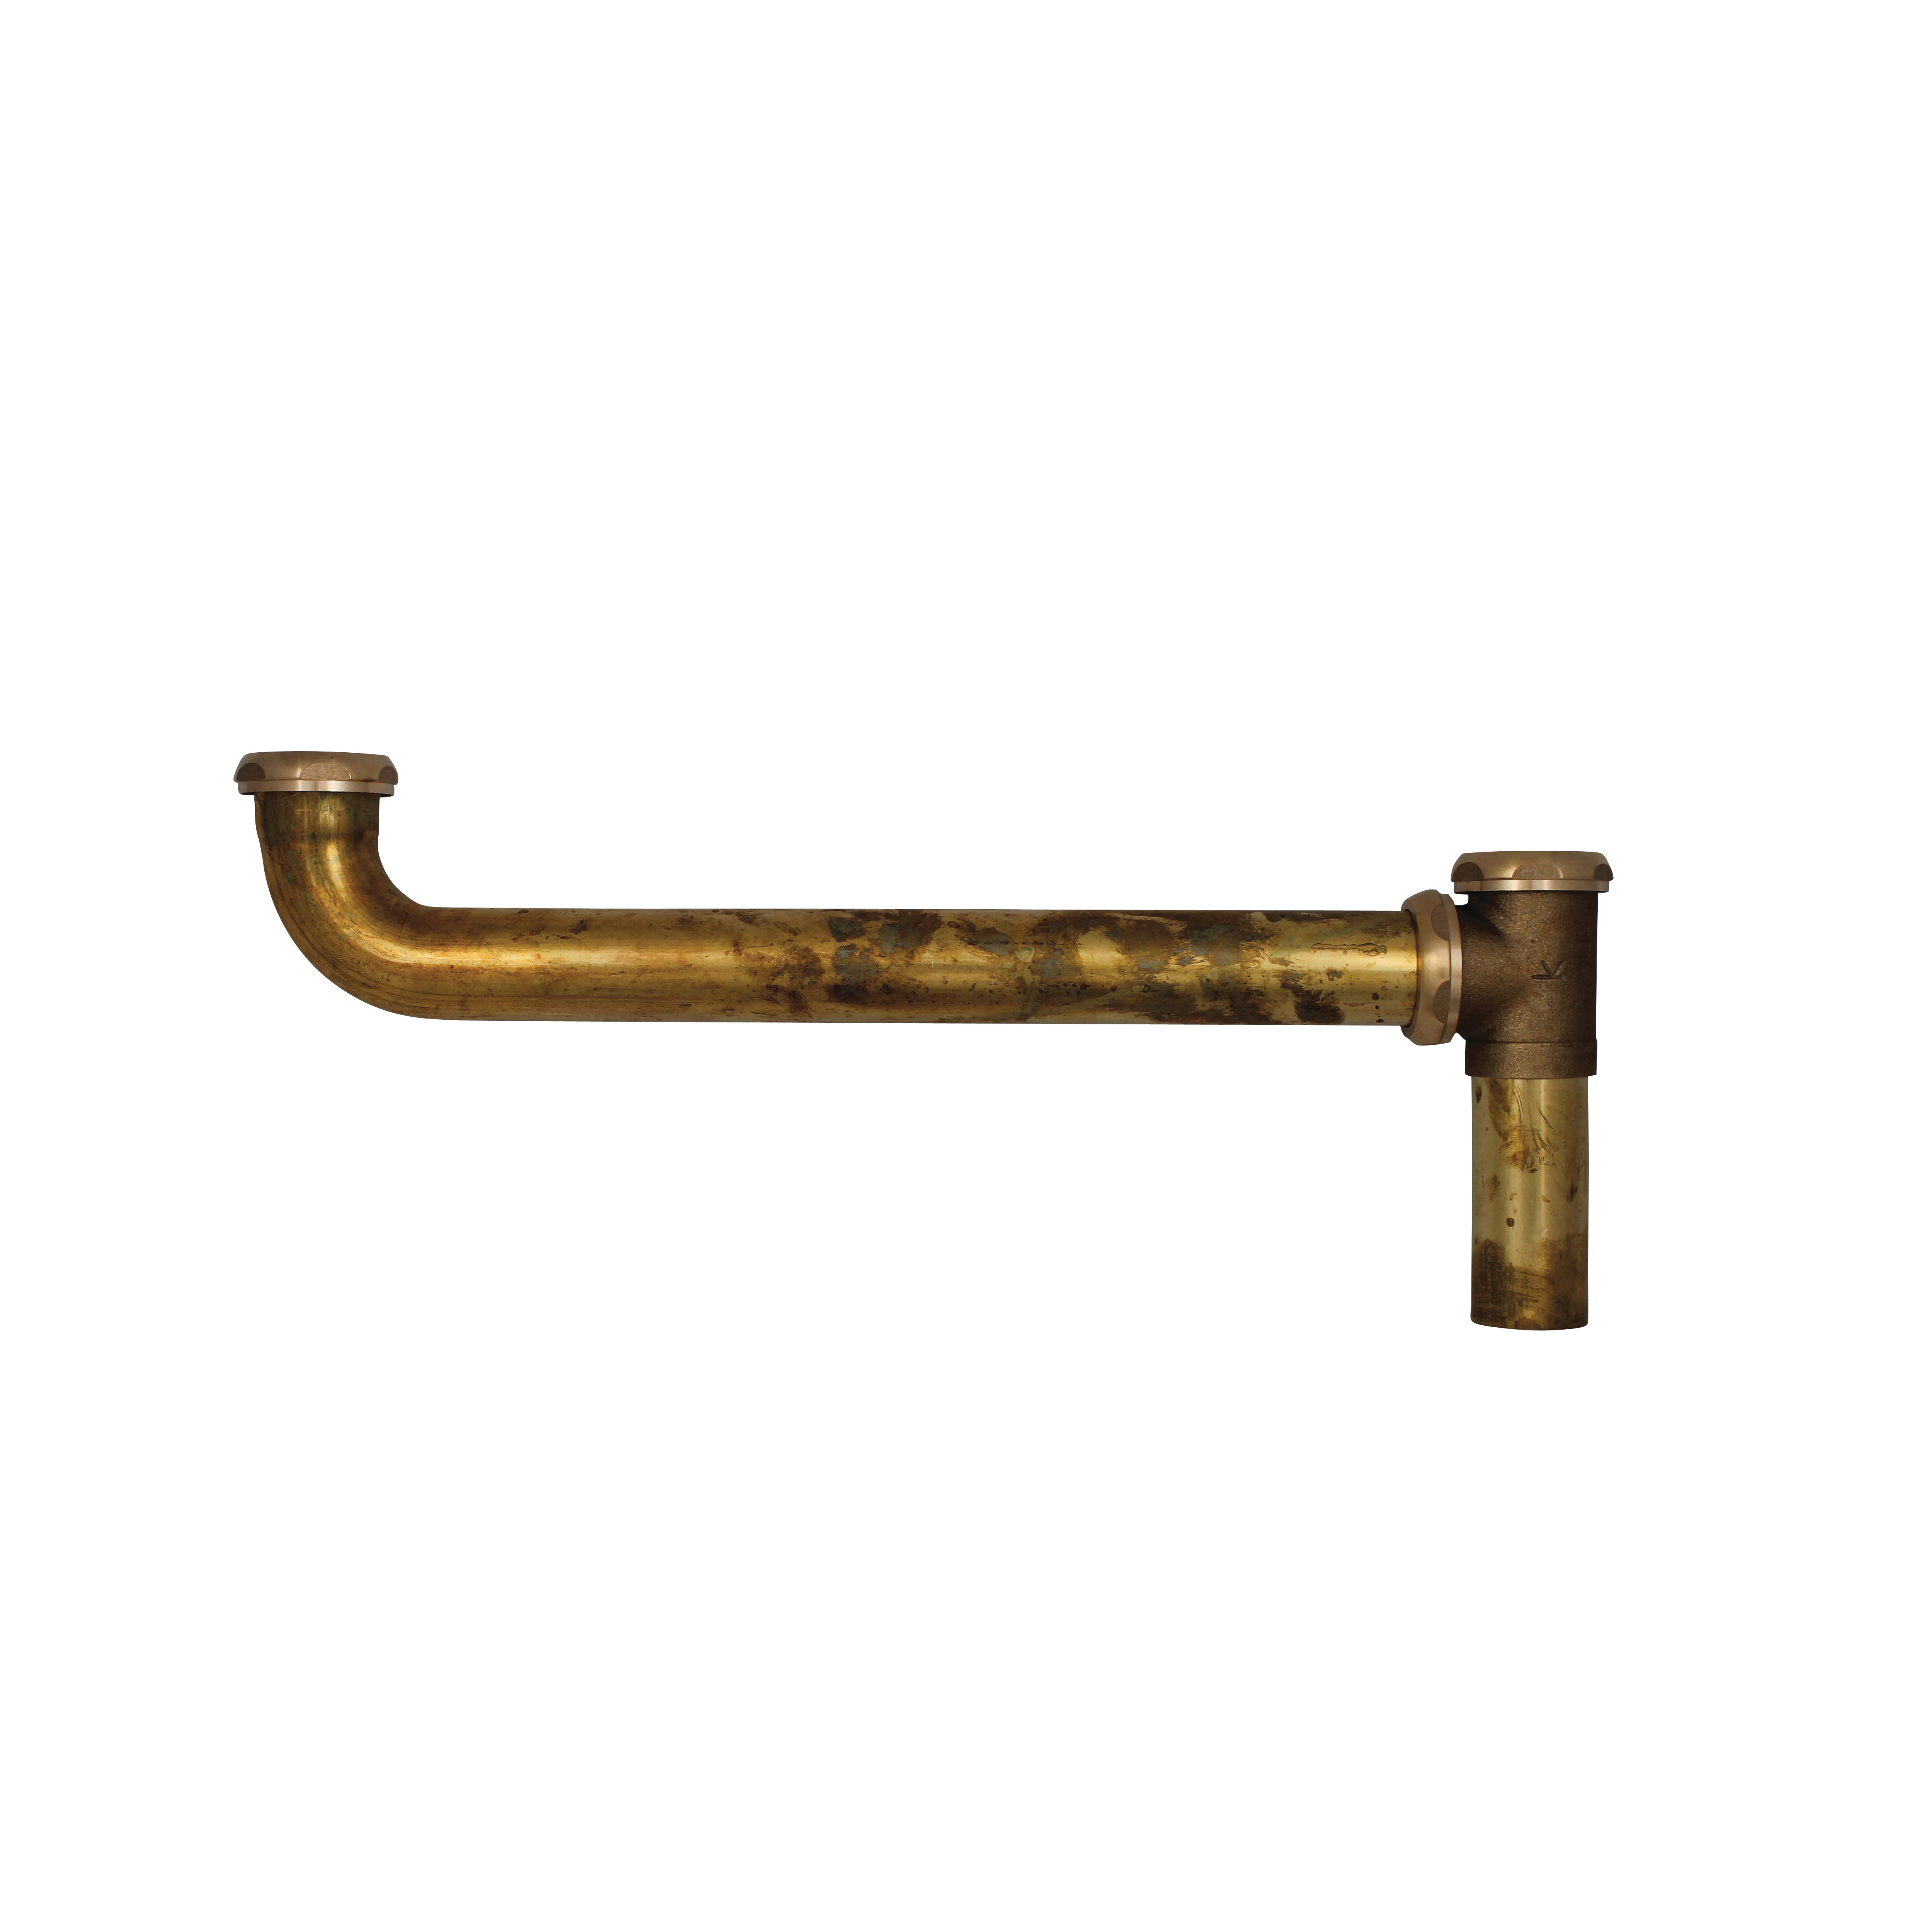 Keeney 4817RB Continuous Waste End Outlet Drain With Brass Nuts and Baffle Tee, 1-1/2 in Nominal, 20 ga, Brass, Rough Brass